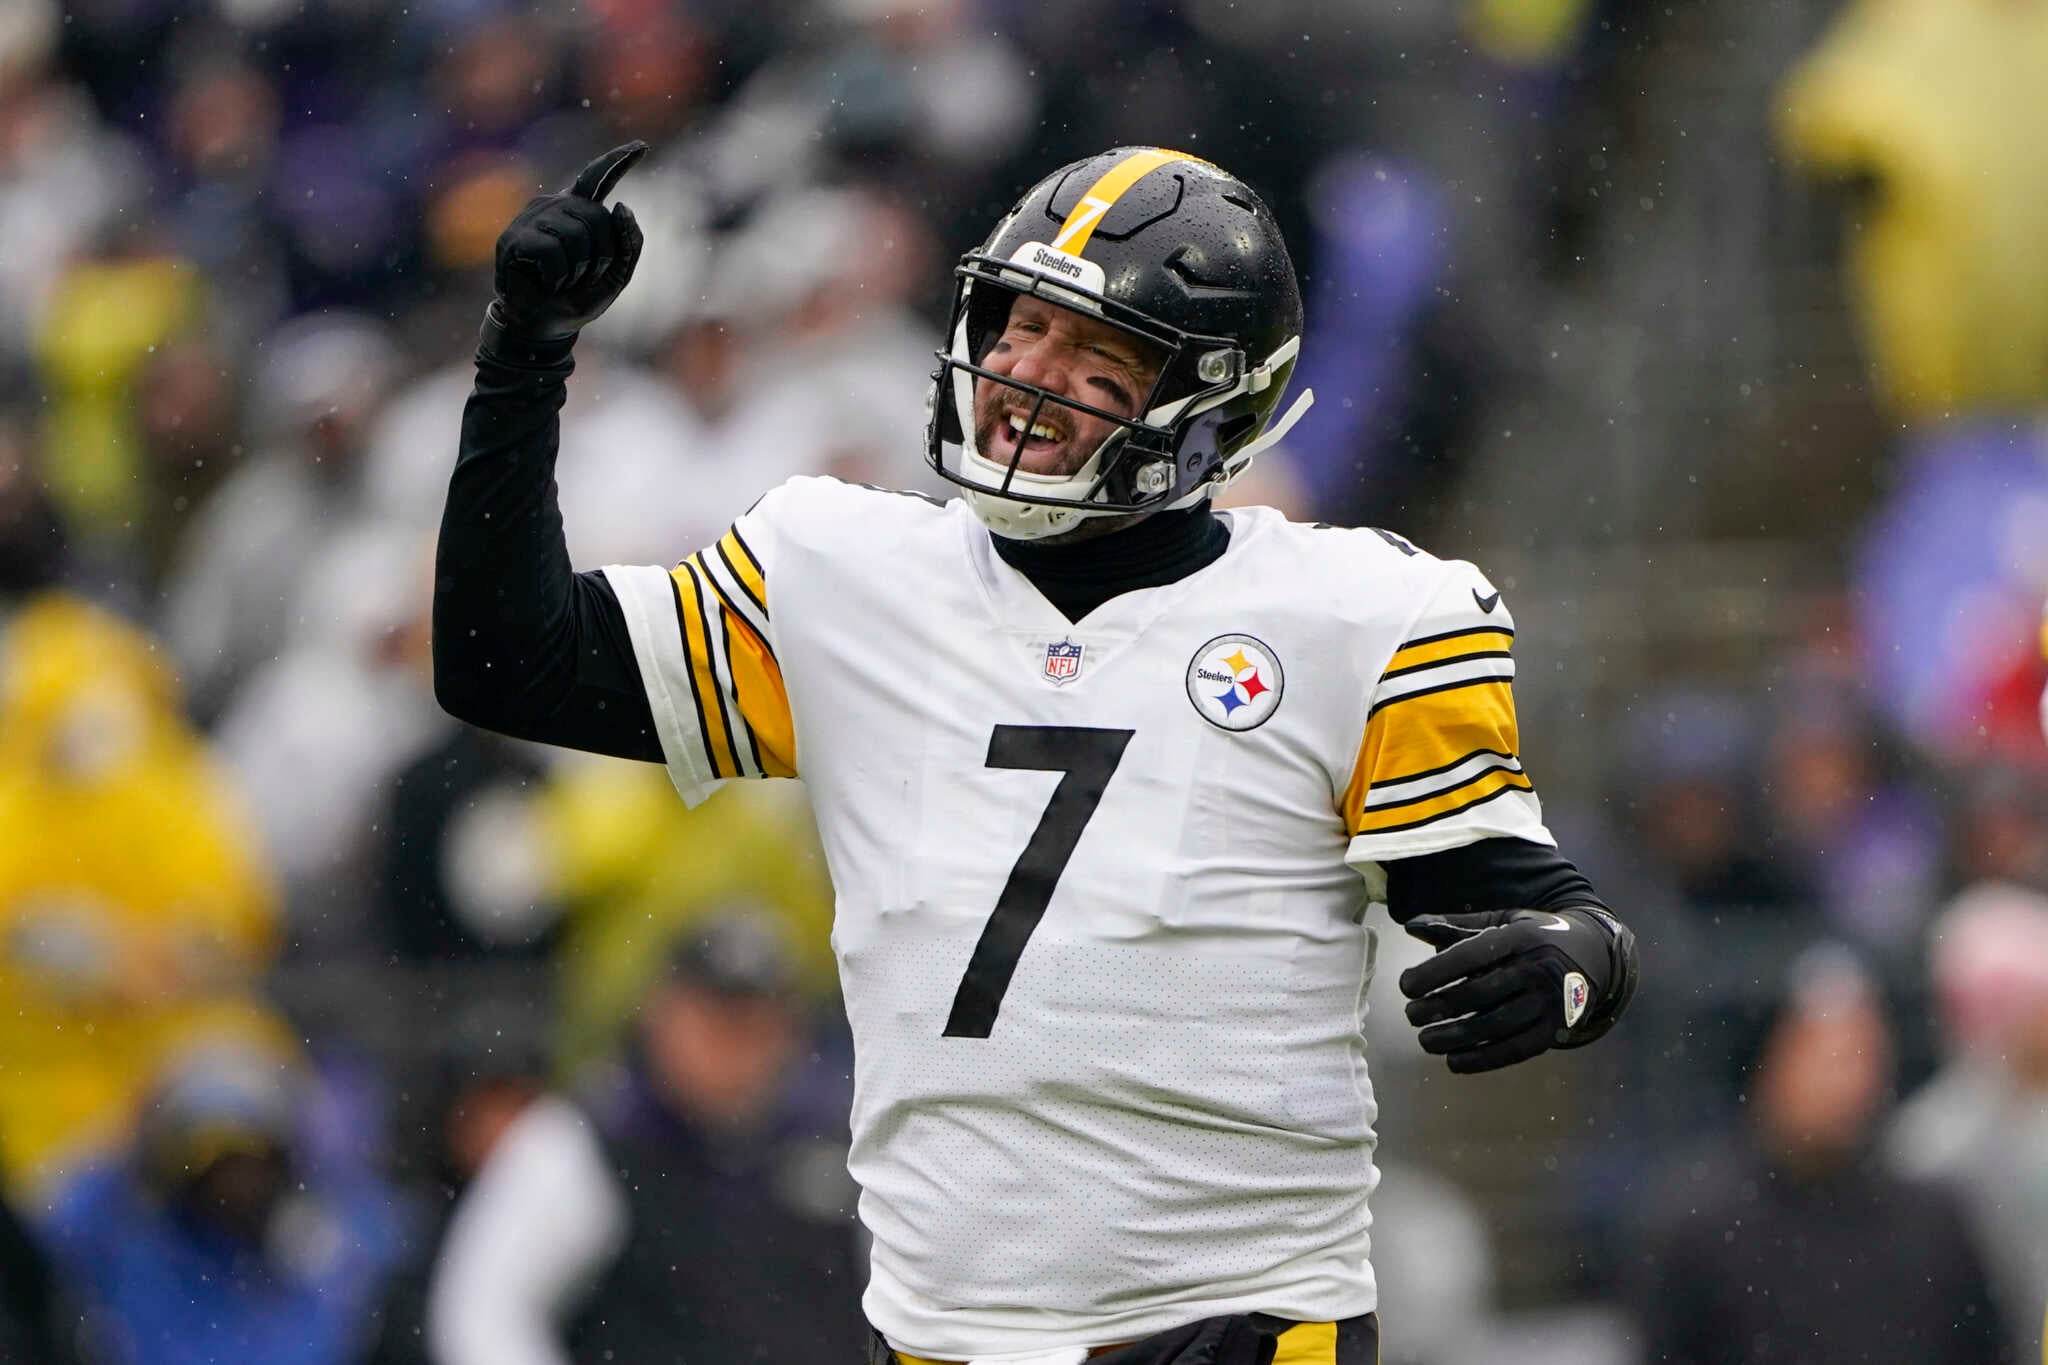 ‘I Thank God’ NFL Star Ben Roethlisberger Keeps First Things First as